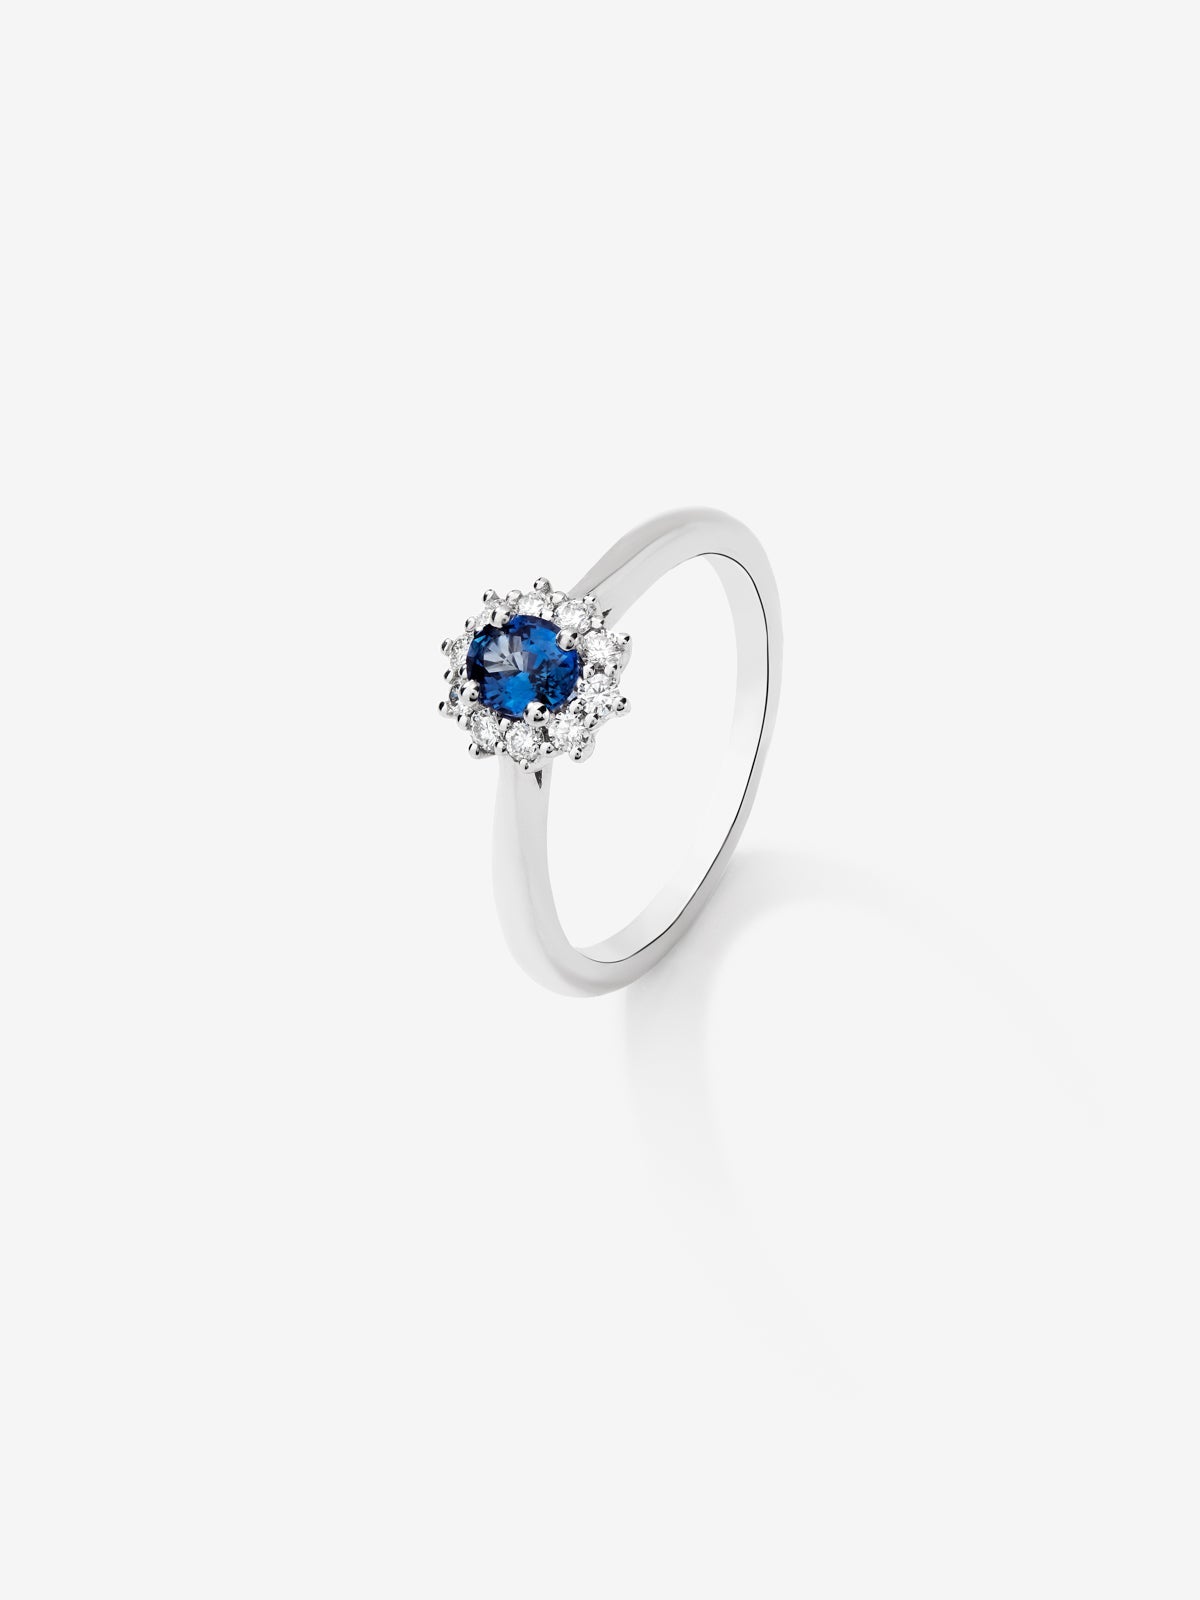 18K white gold ring with oval-cut royal blue sapphire of 0.43 cts and 12 brilliant-cut diamonds with a total of 0.12 cts